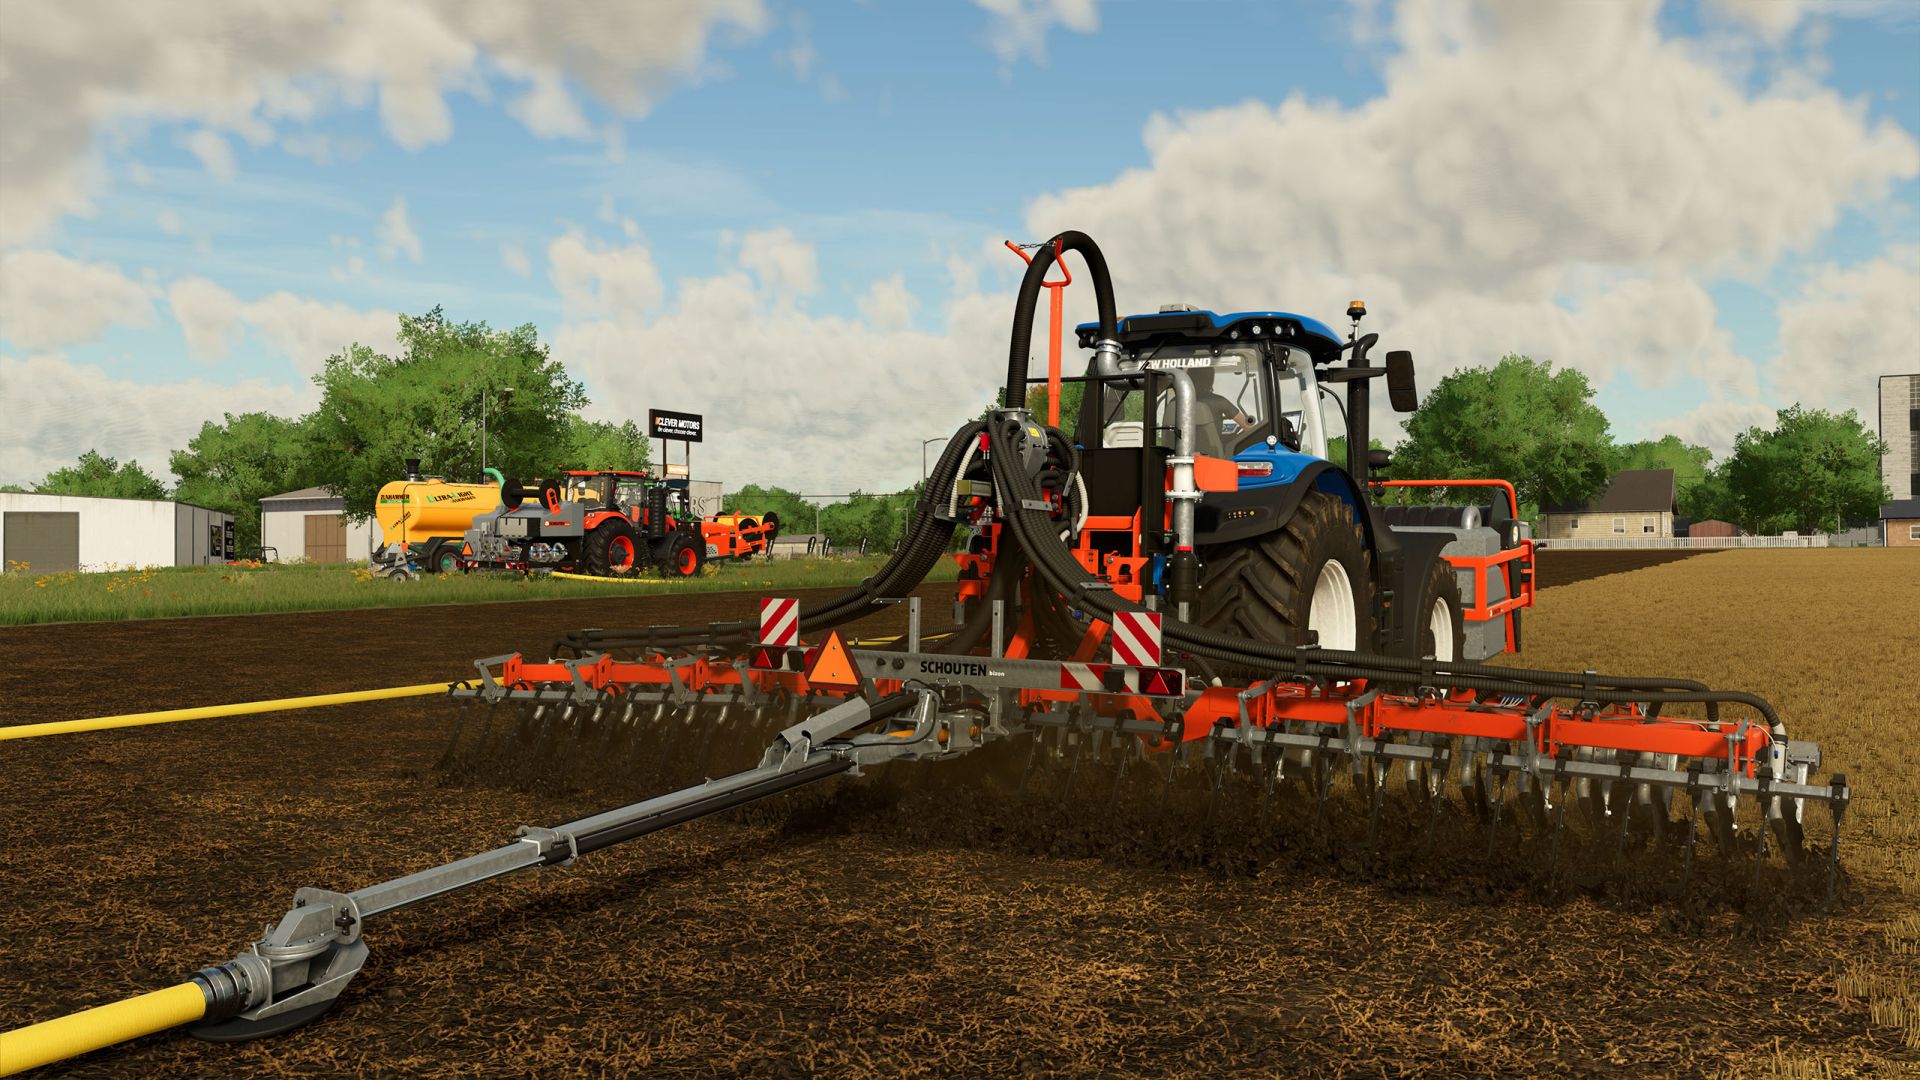 Lots of Content, Lots of Logging - Farming Simulator 22 is Growing - Xbox  Wire